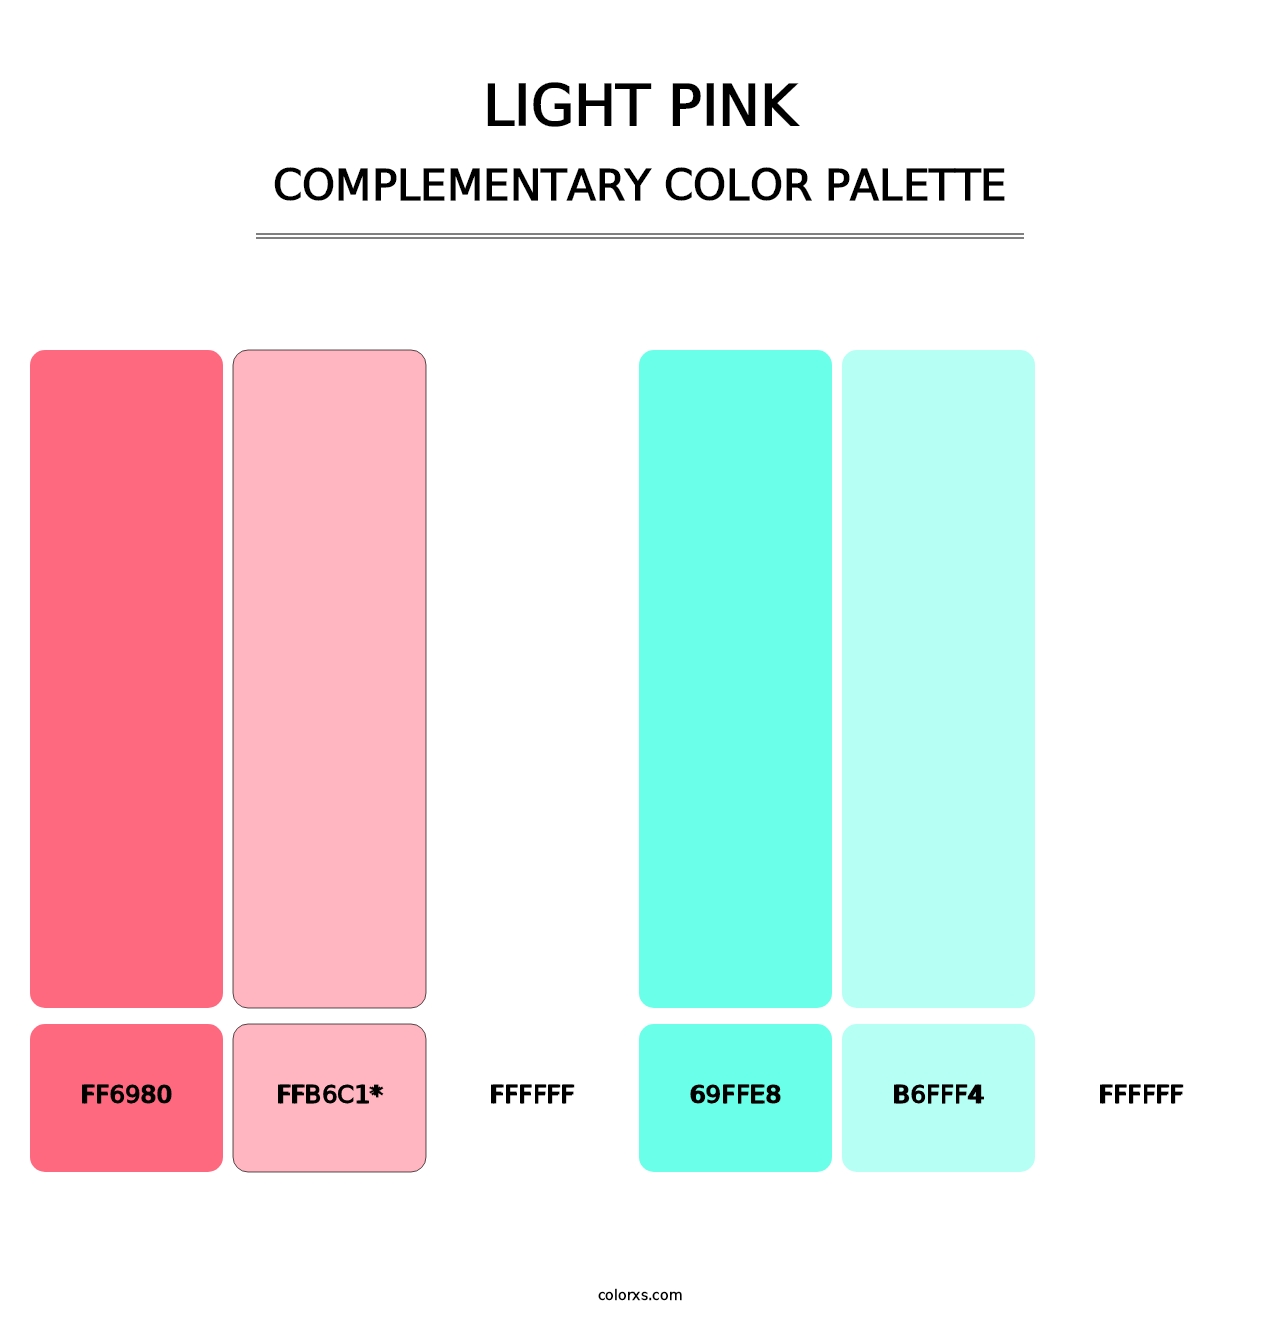 Light Pink - Complementary Color Palette